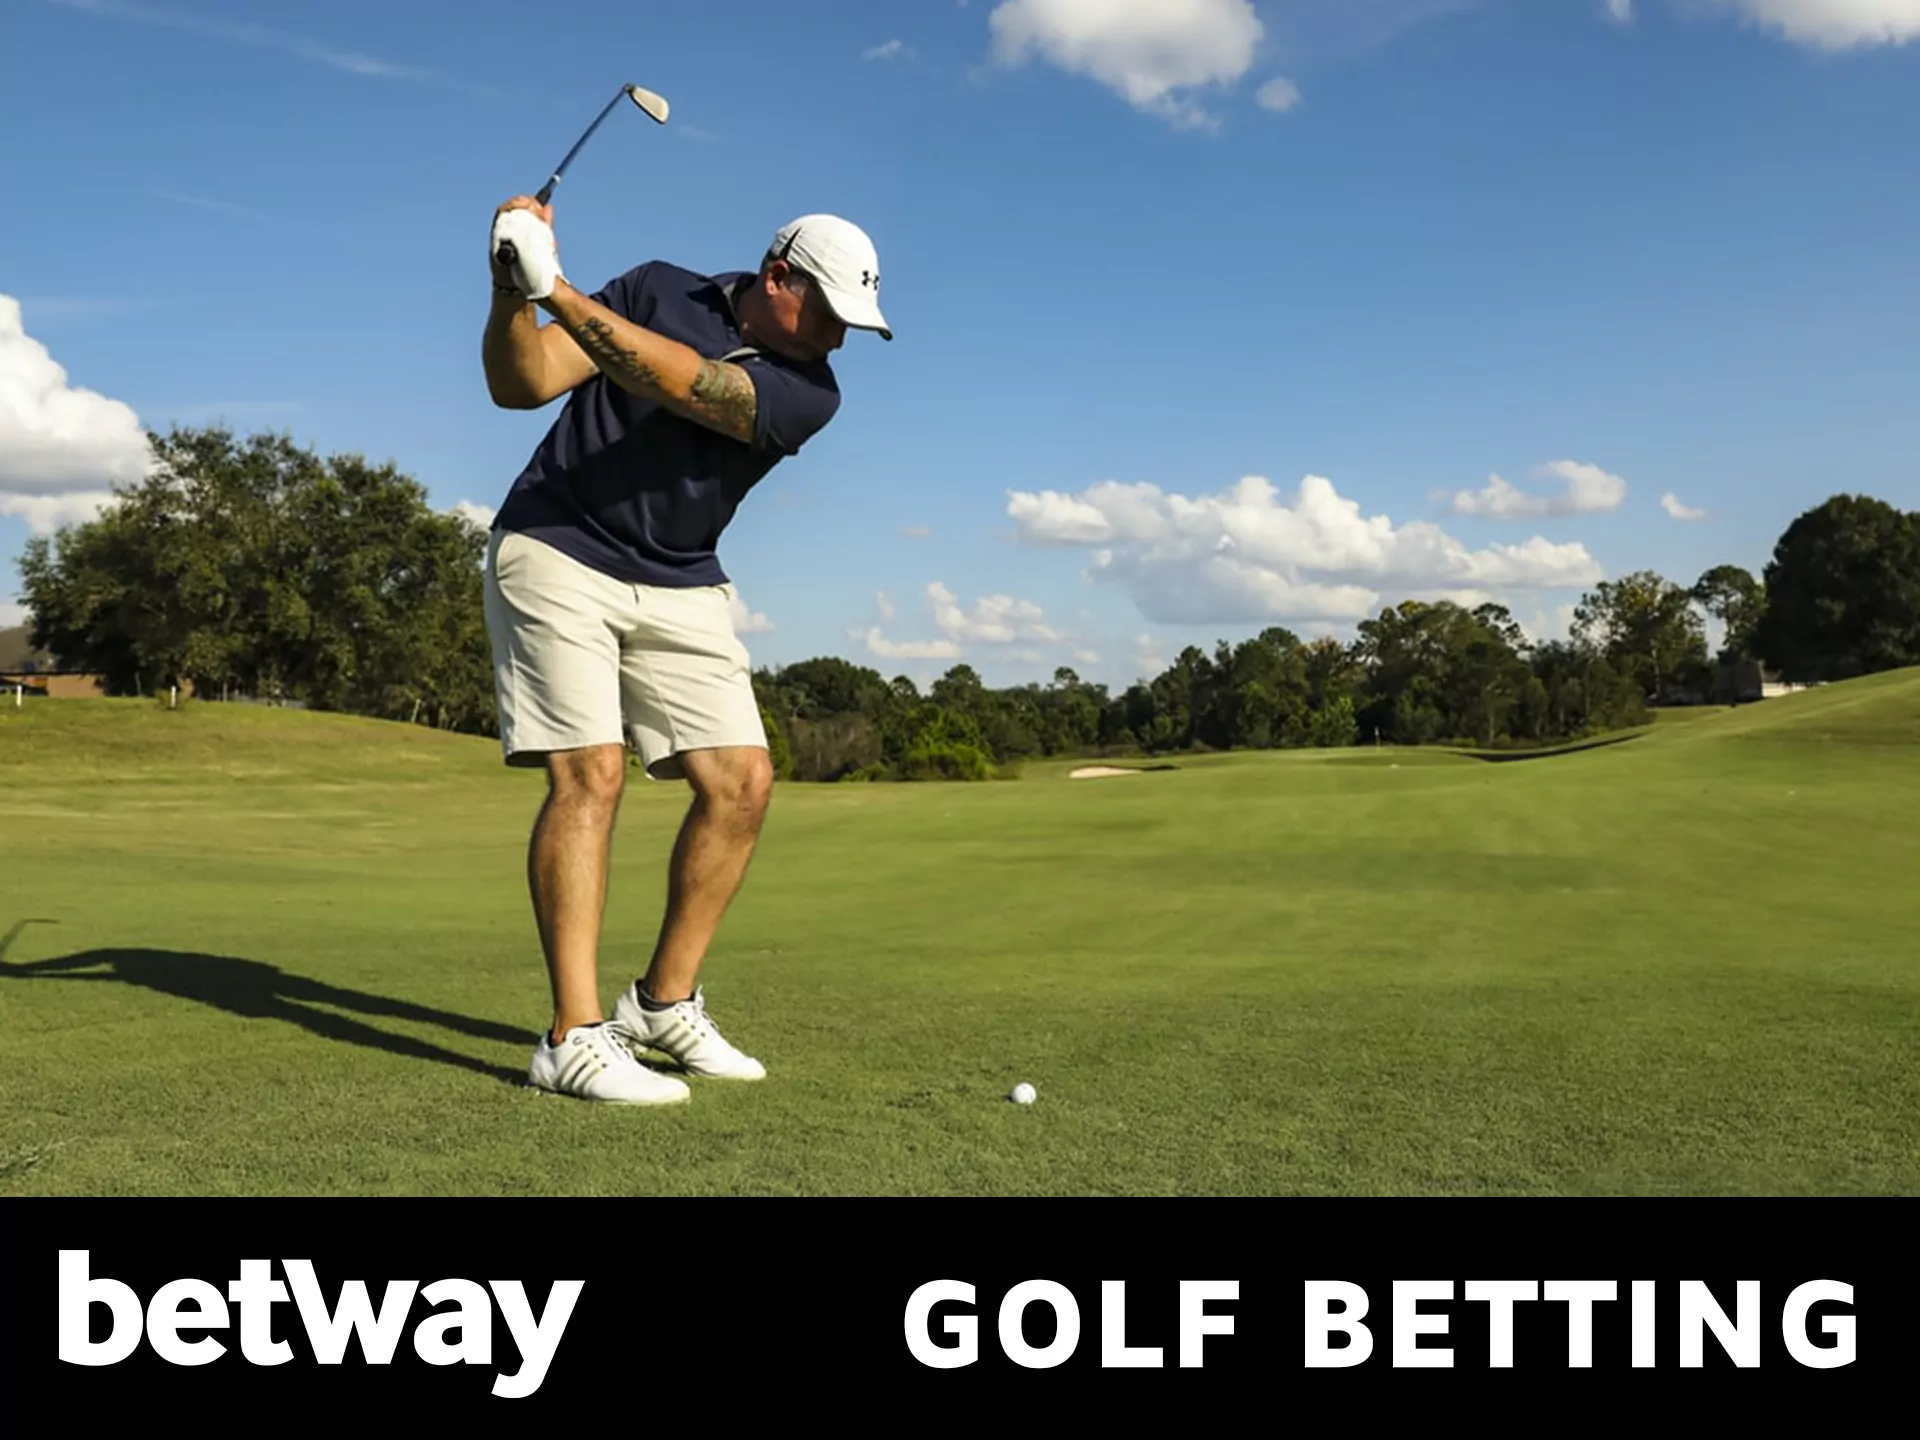 Golf betting on Betway.